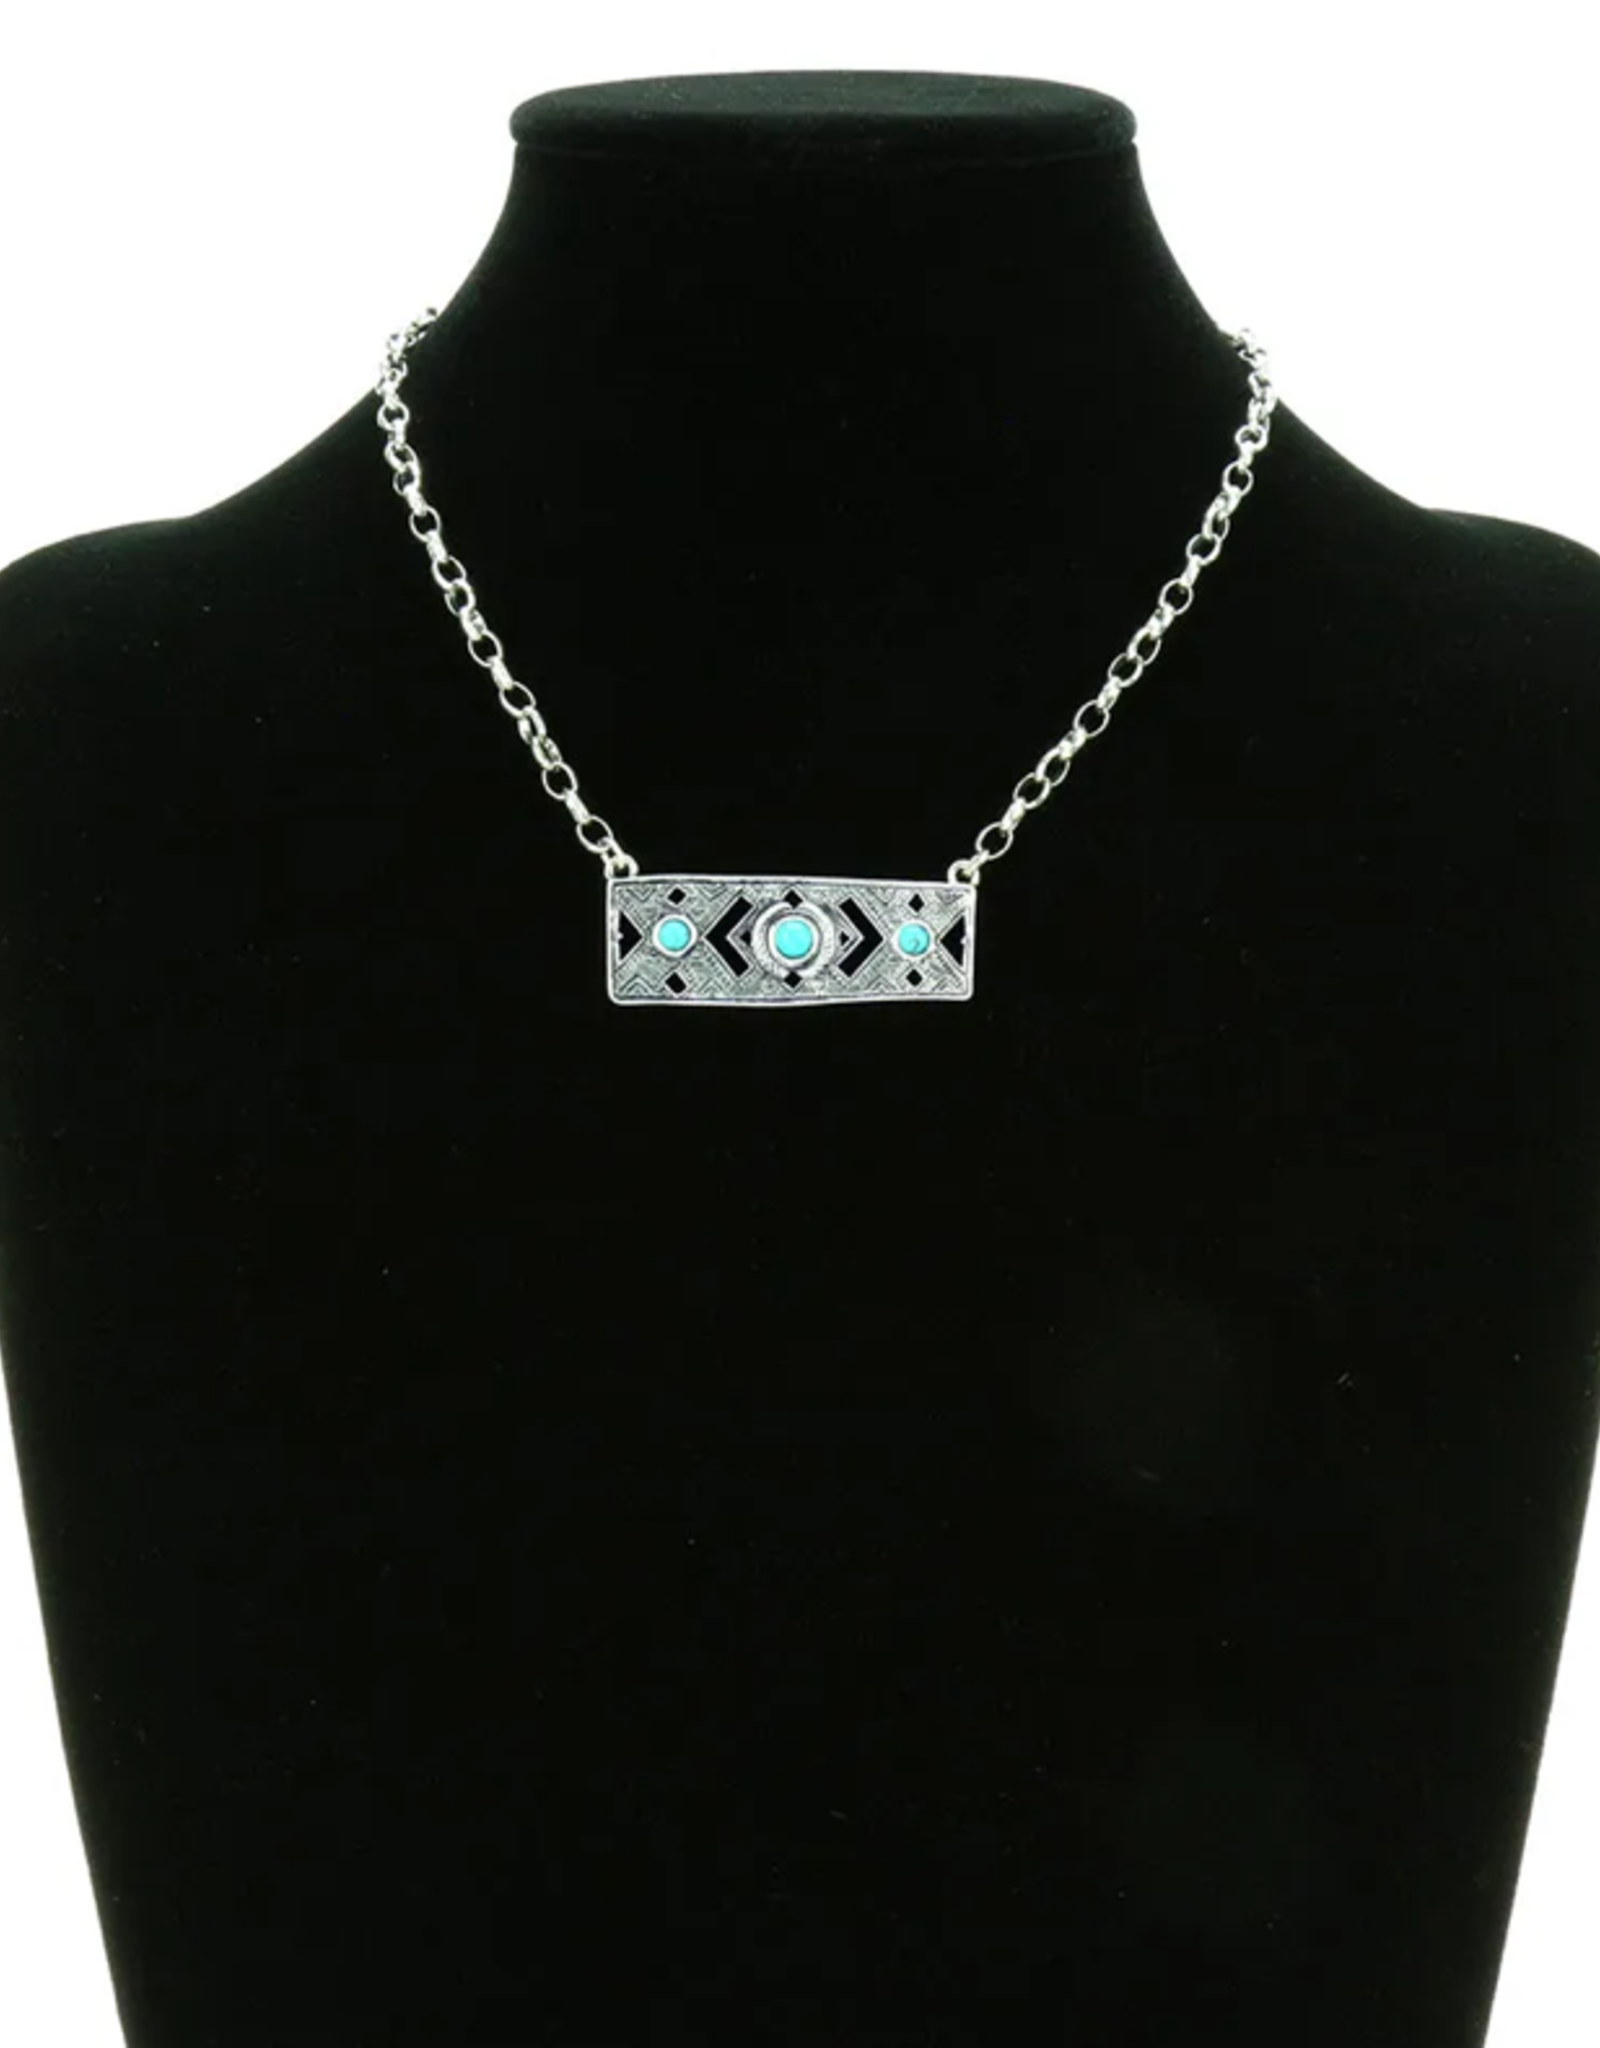 NECKLACE WESTERN STYLE BAR CHAIN